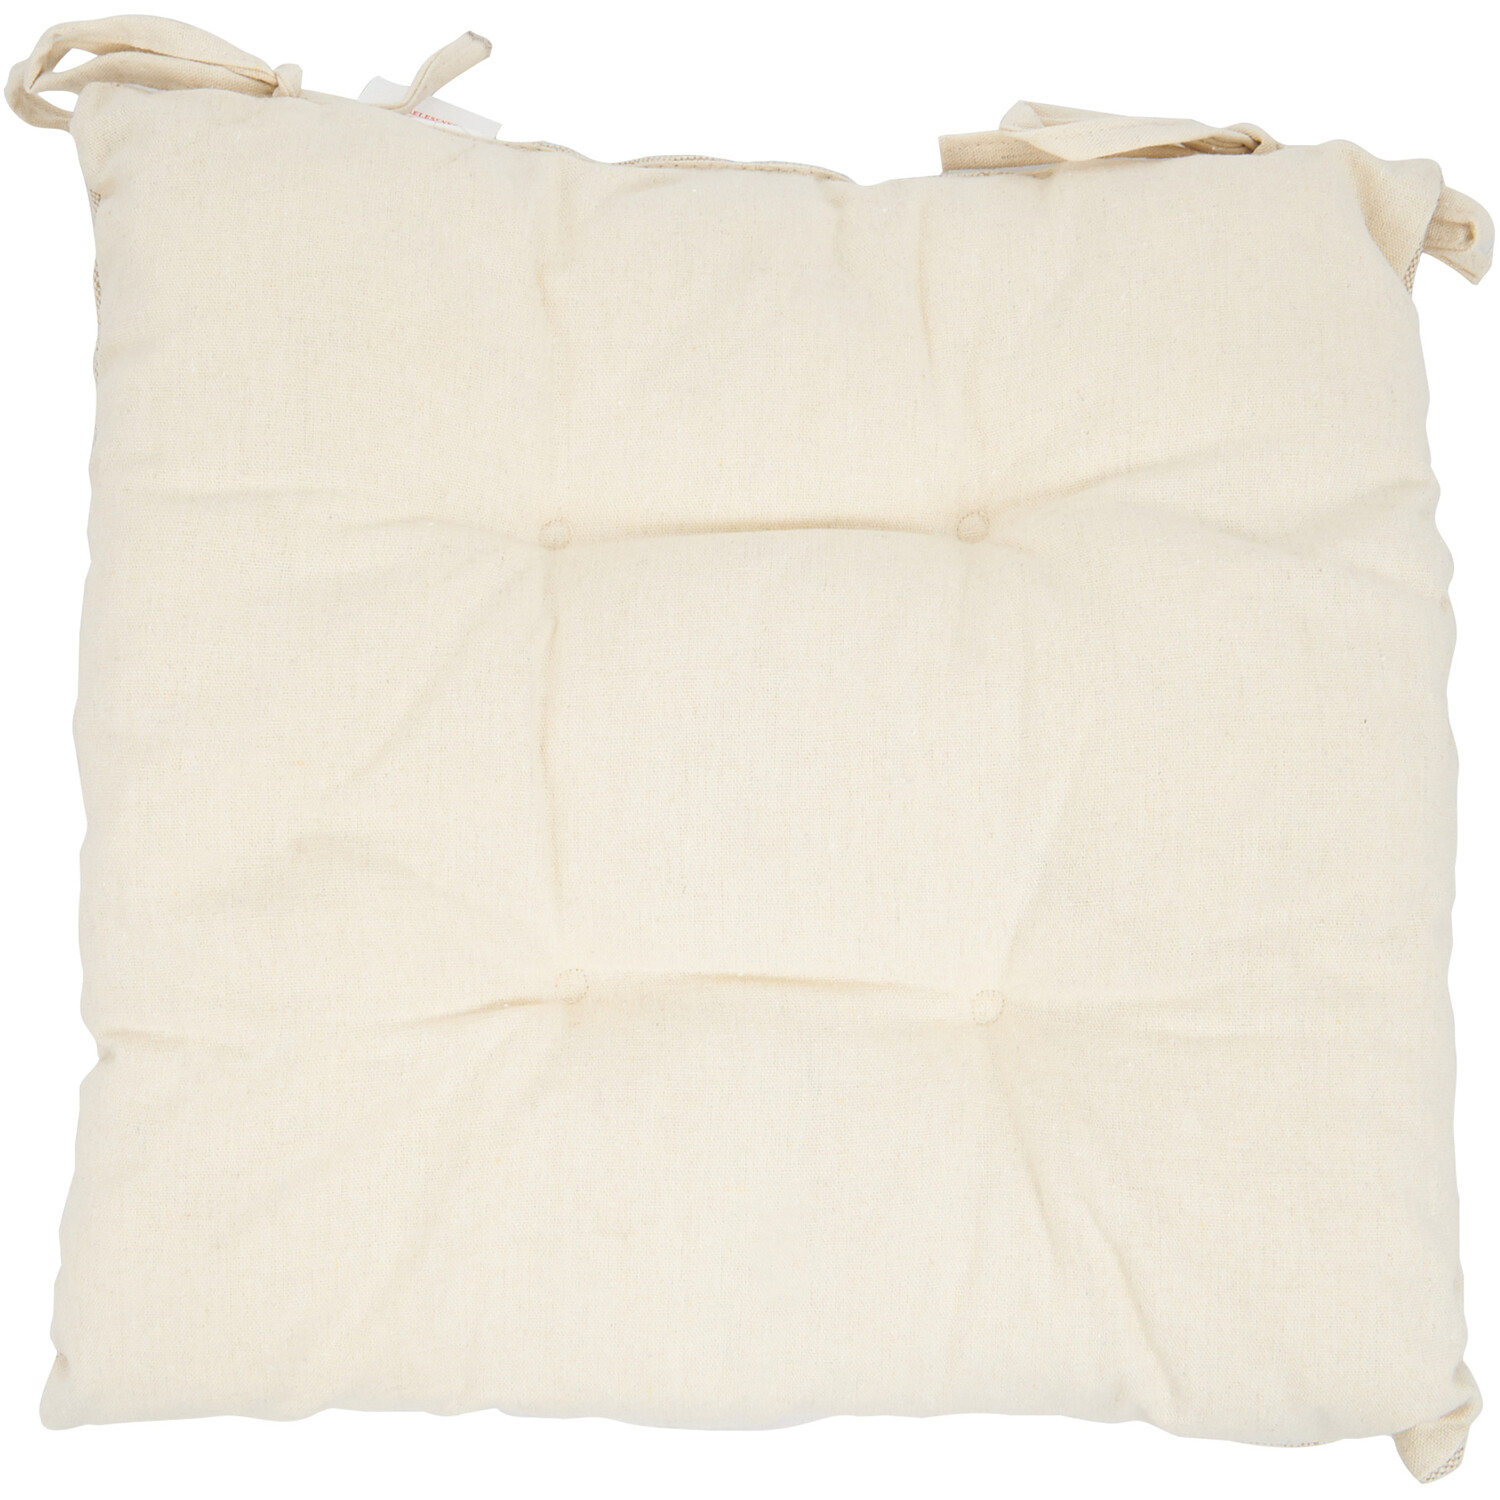 Natural Double Sided Cotton Seat Pad 40 x 40cm Image 1